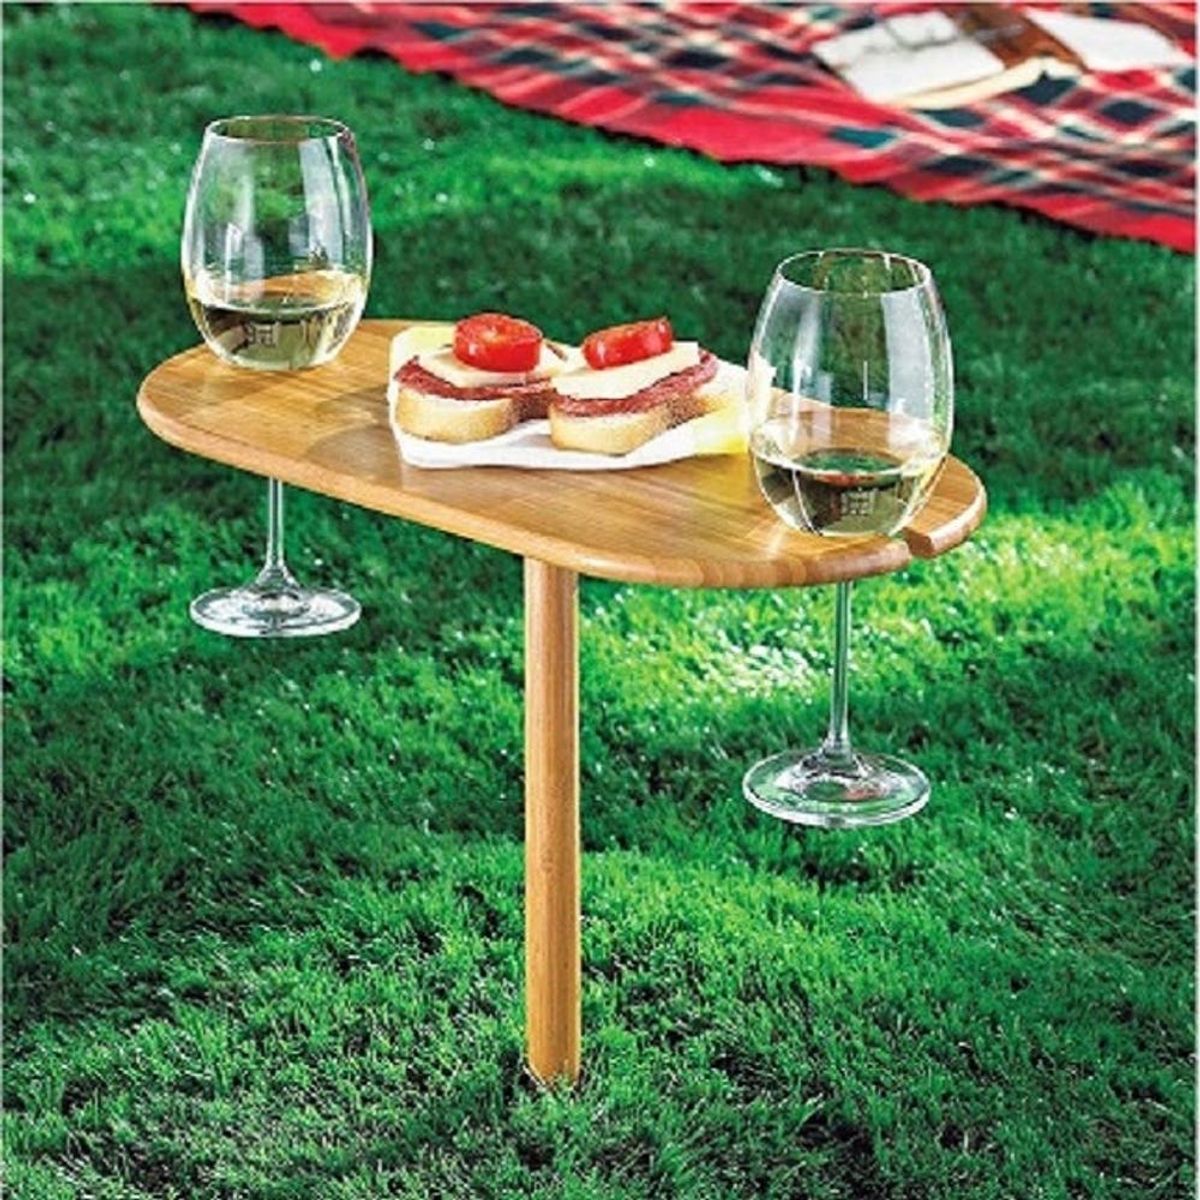 22 Picks for the Perfect Picnic Party